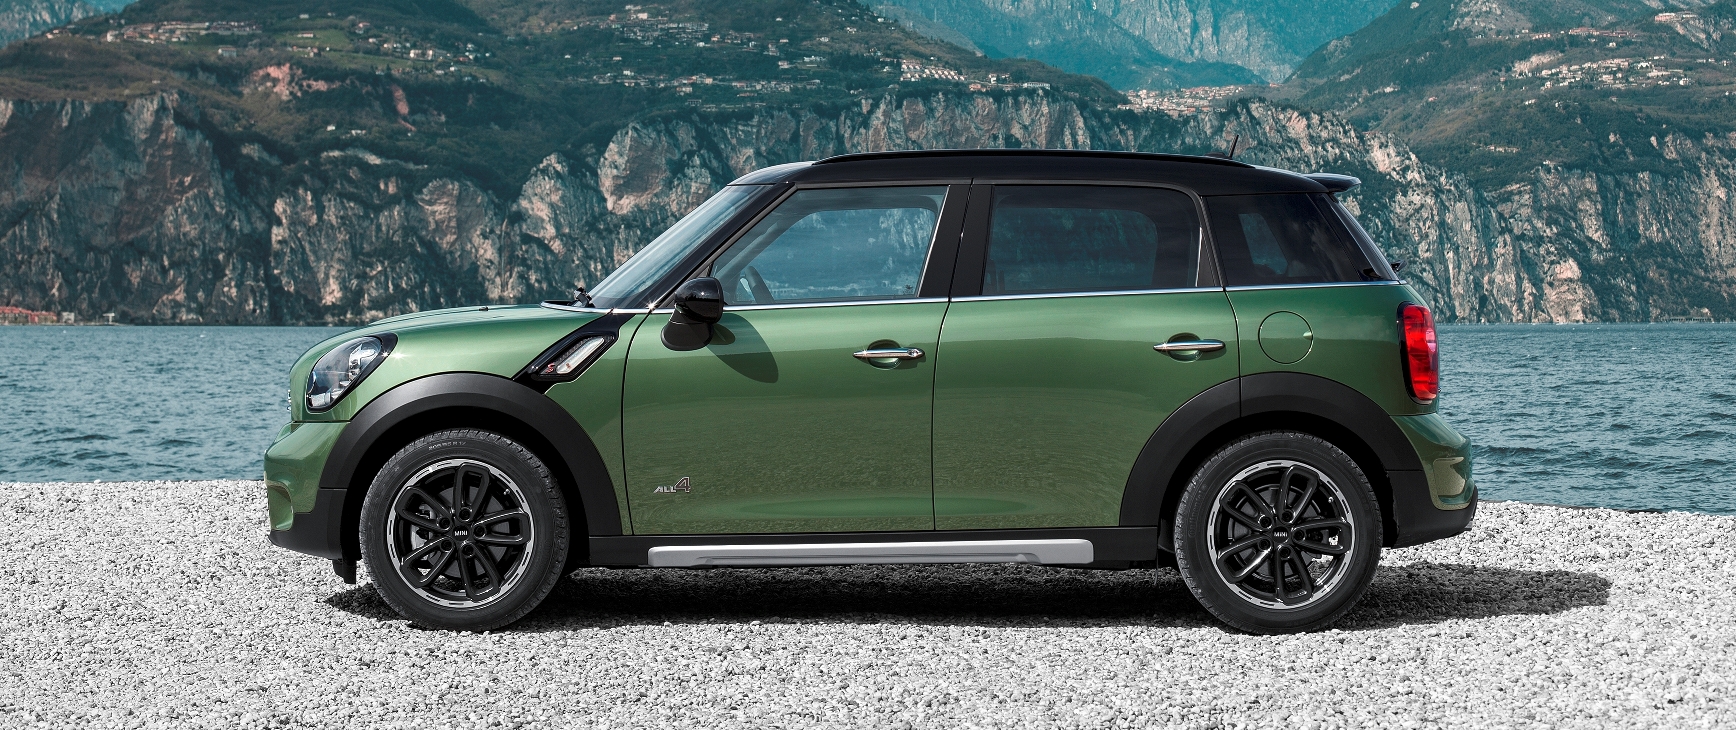 2015 MINI Countryman Debuts Dark-Trimmed Style and LED Foglamp Rings